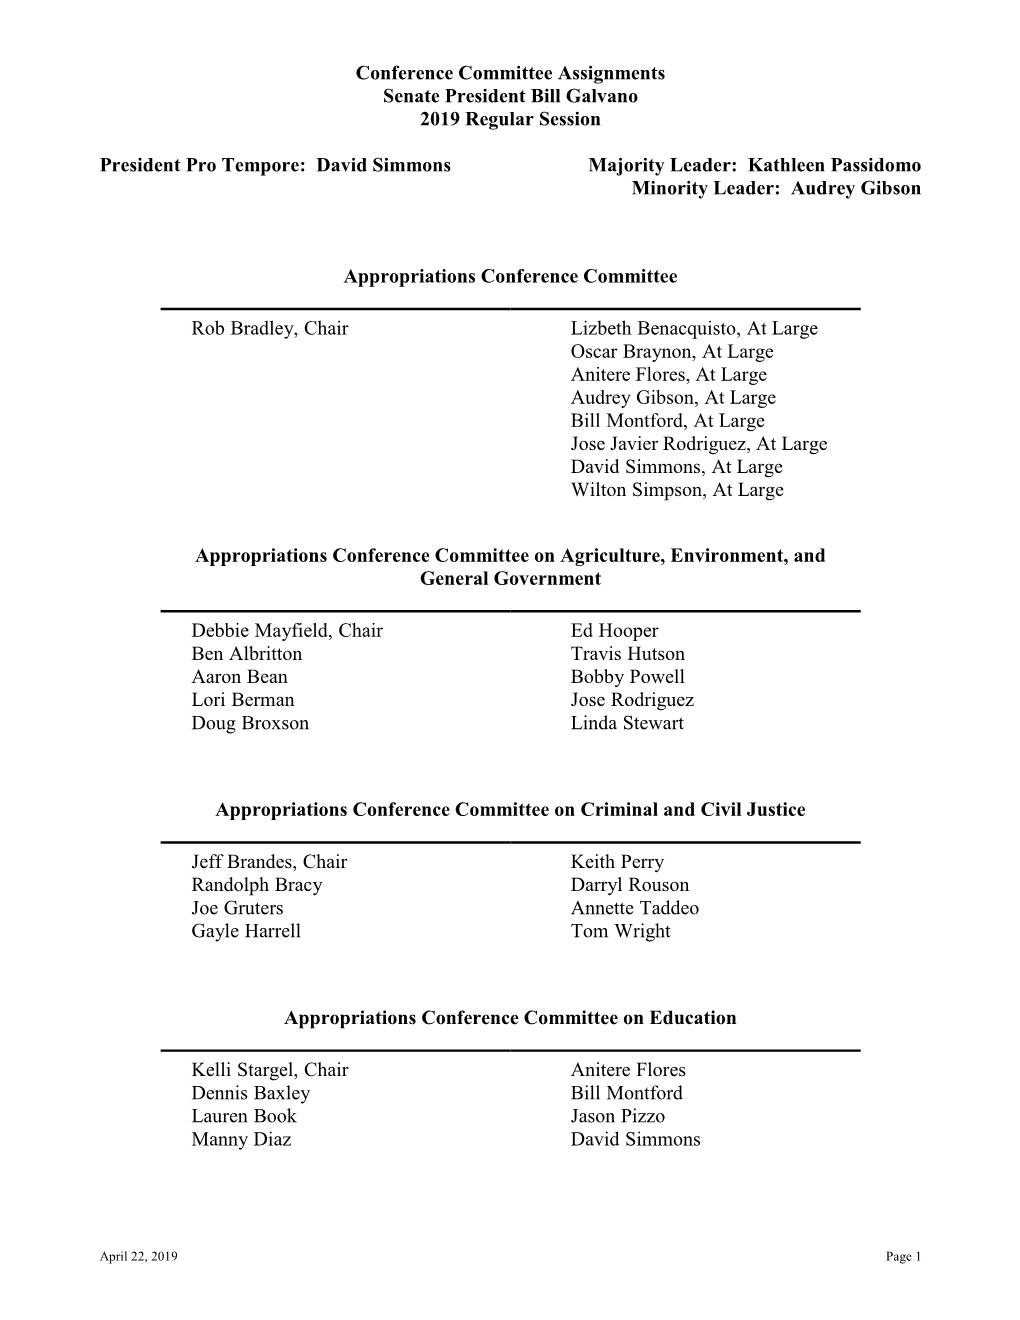 Conference Committee Assignments Senate President Bill Galvano 2019 Regular Session